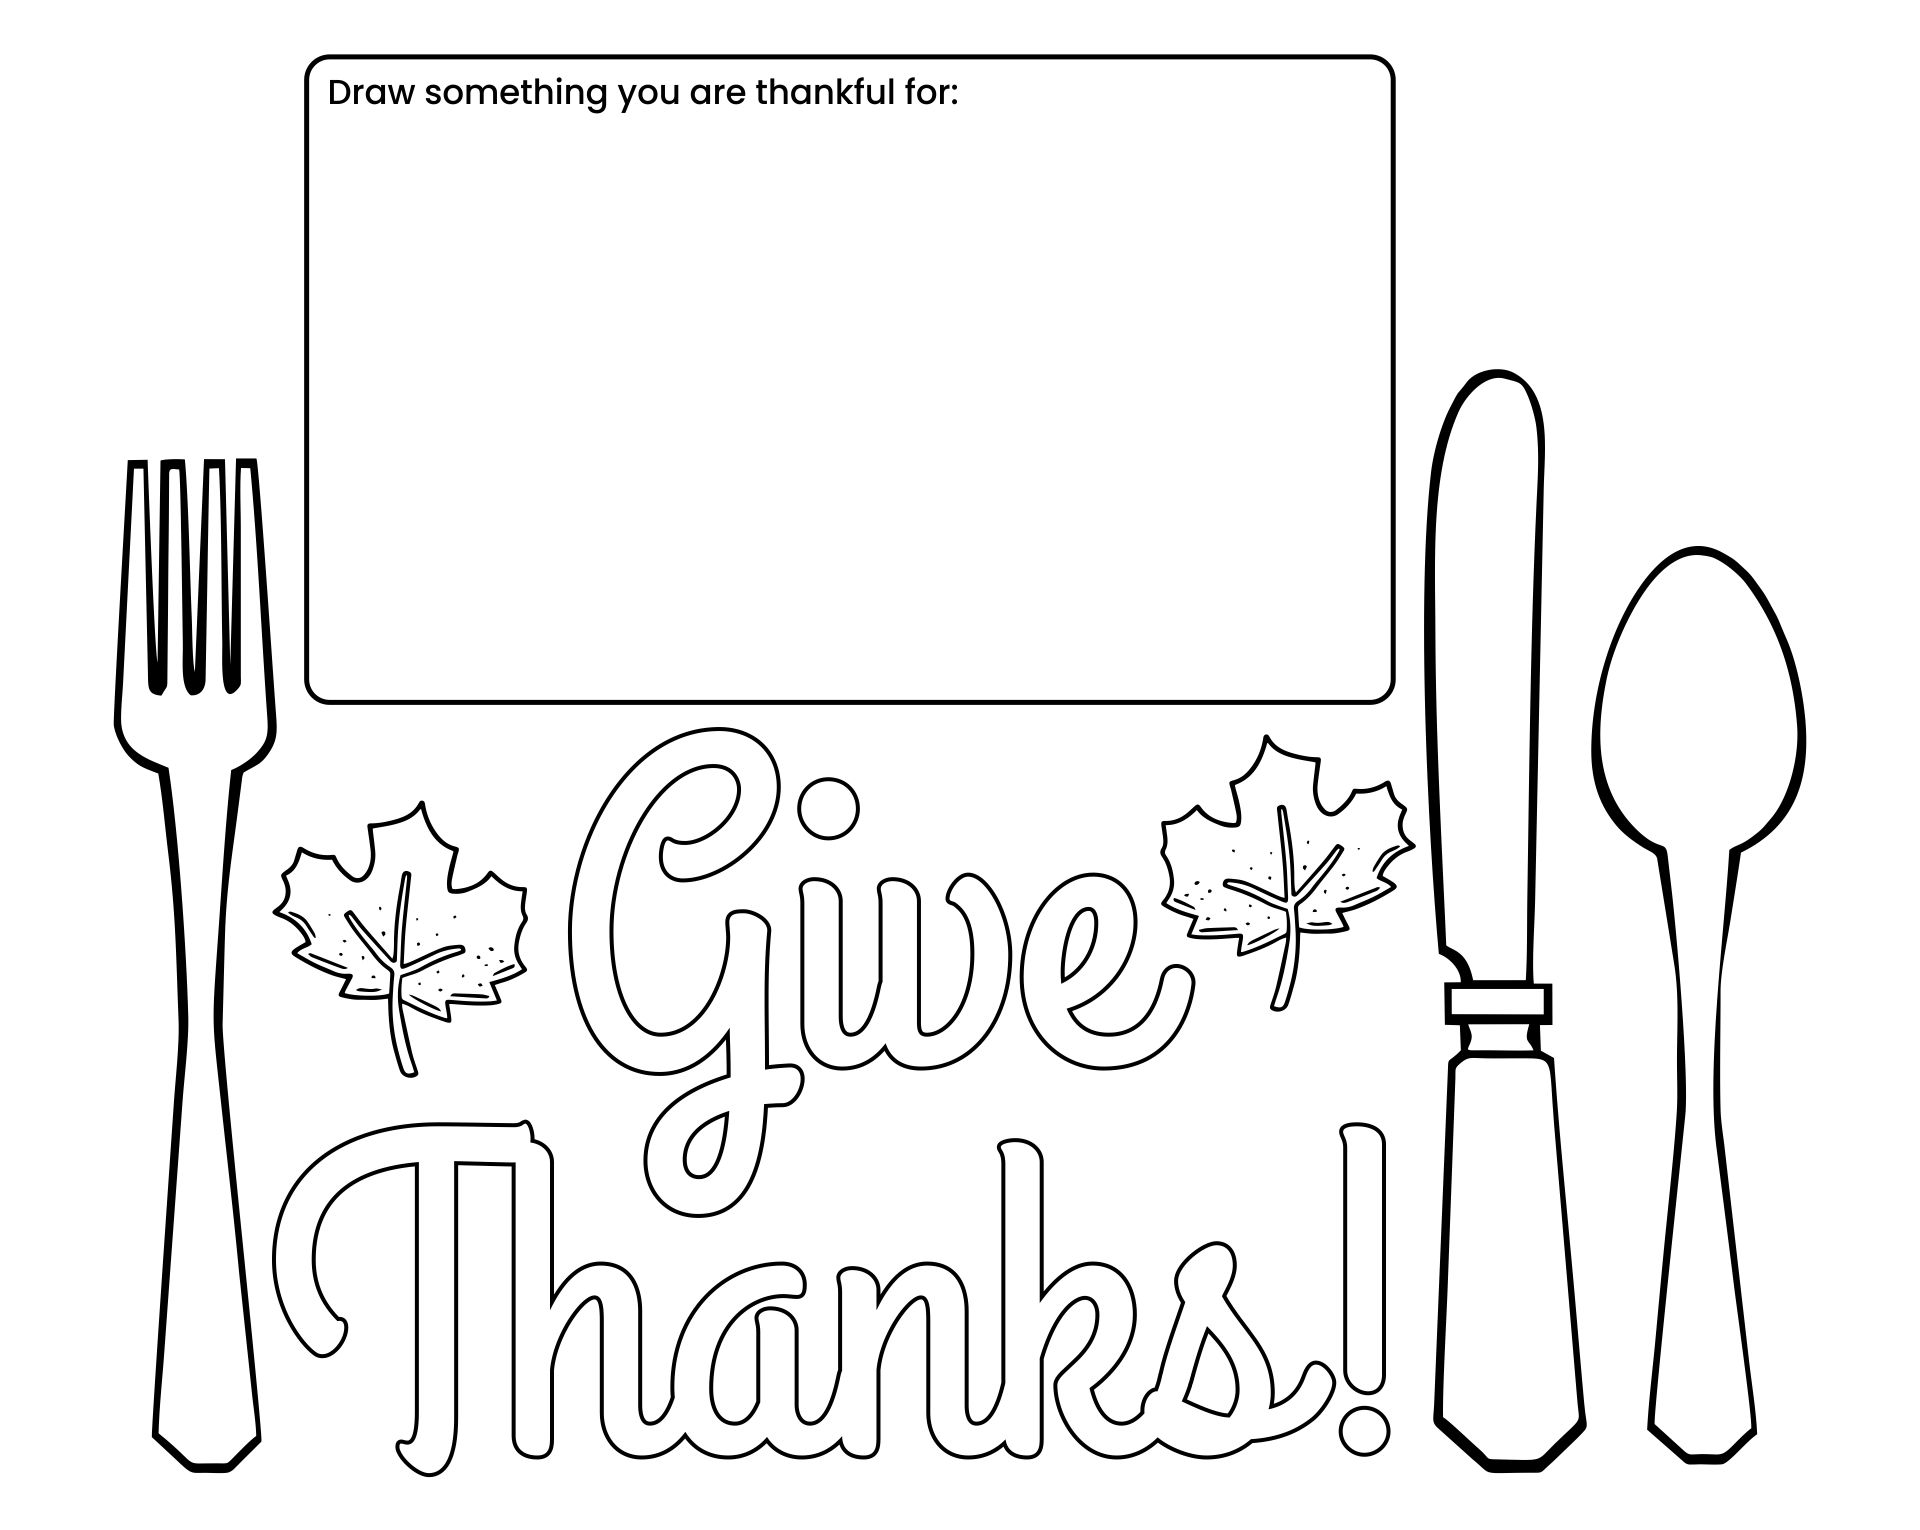 Printable Placemat For Giving Thanks